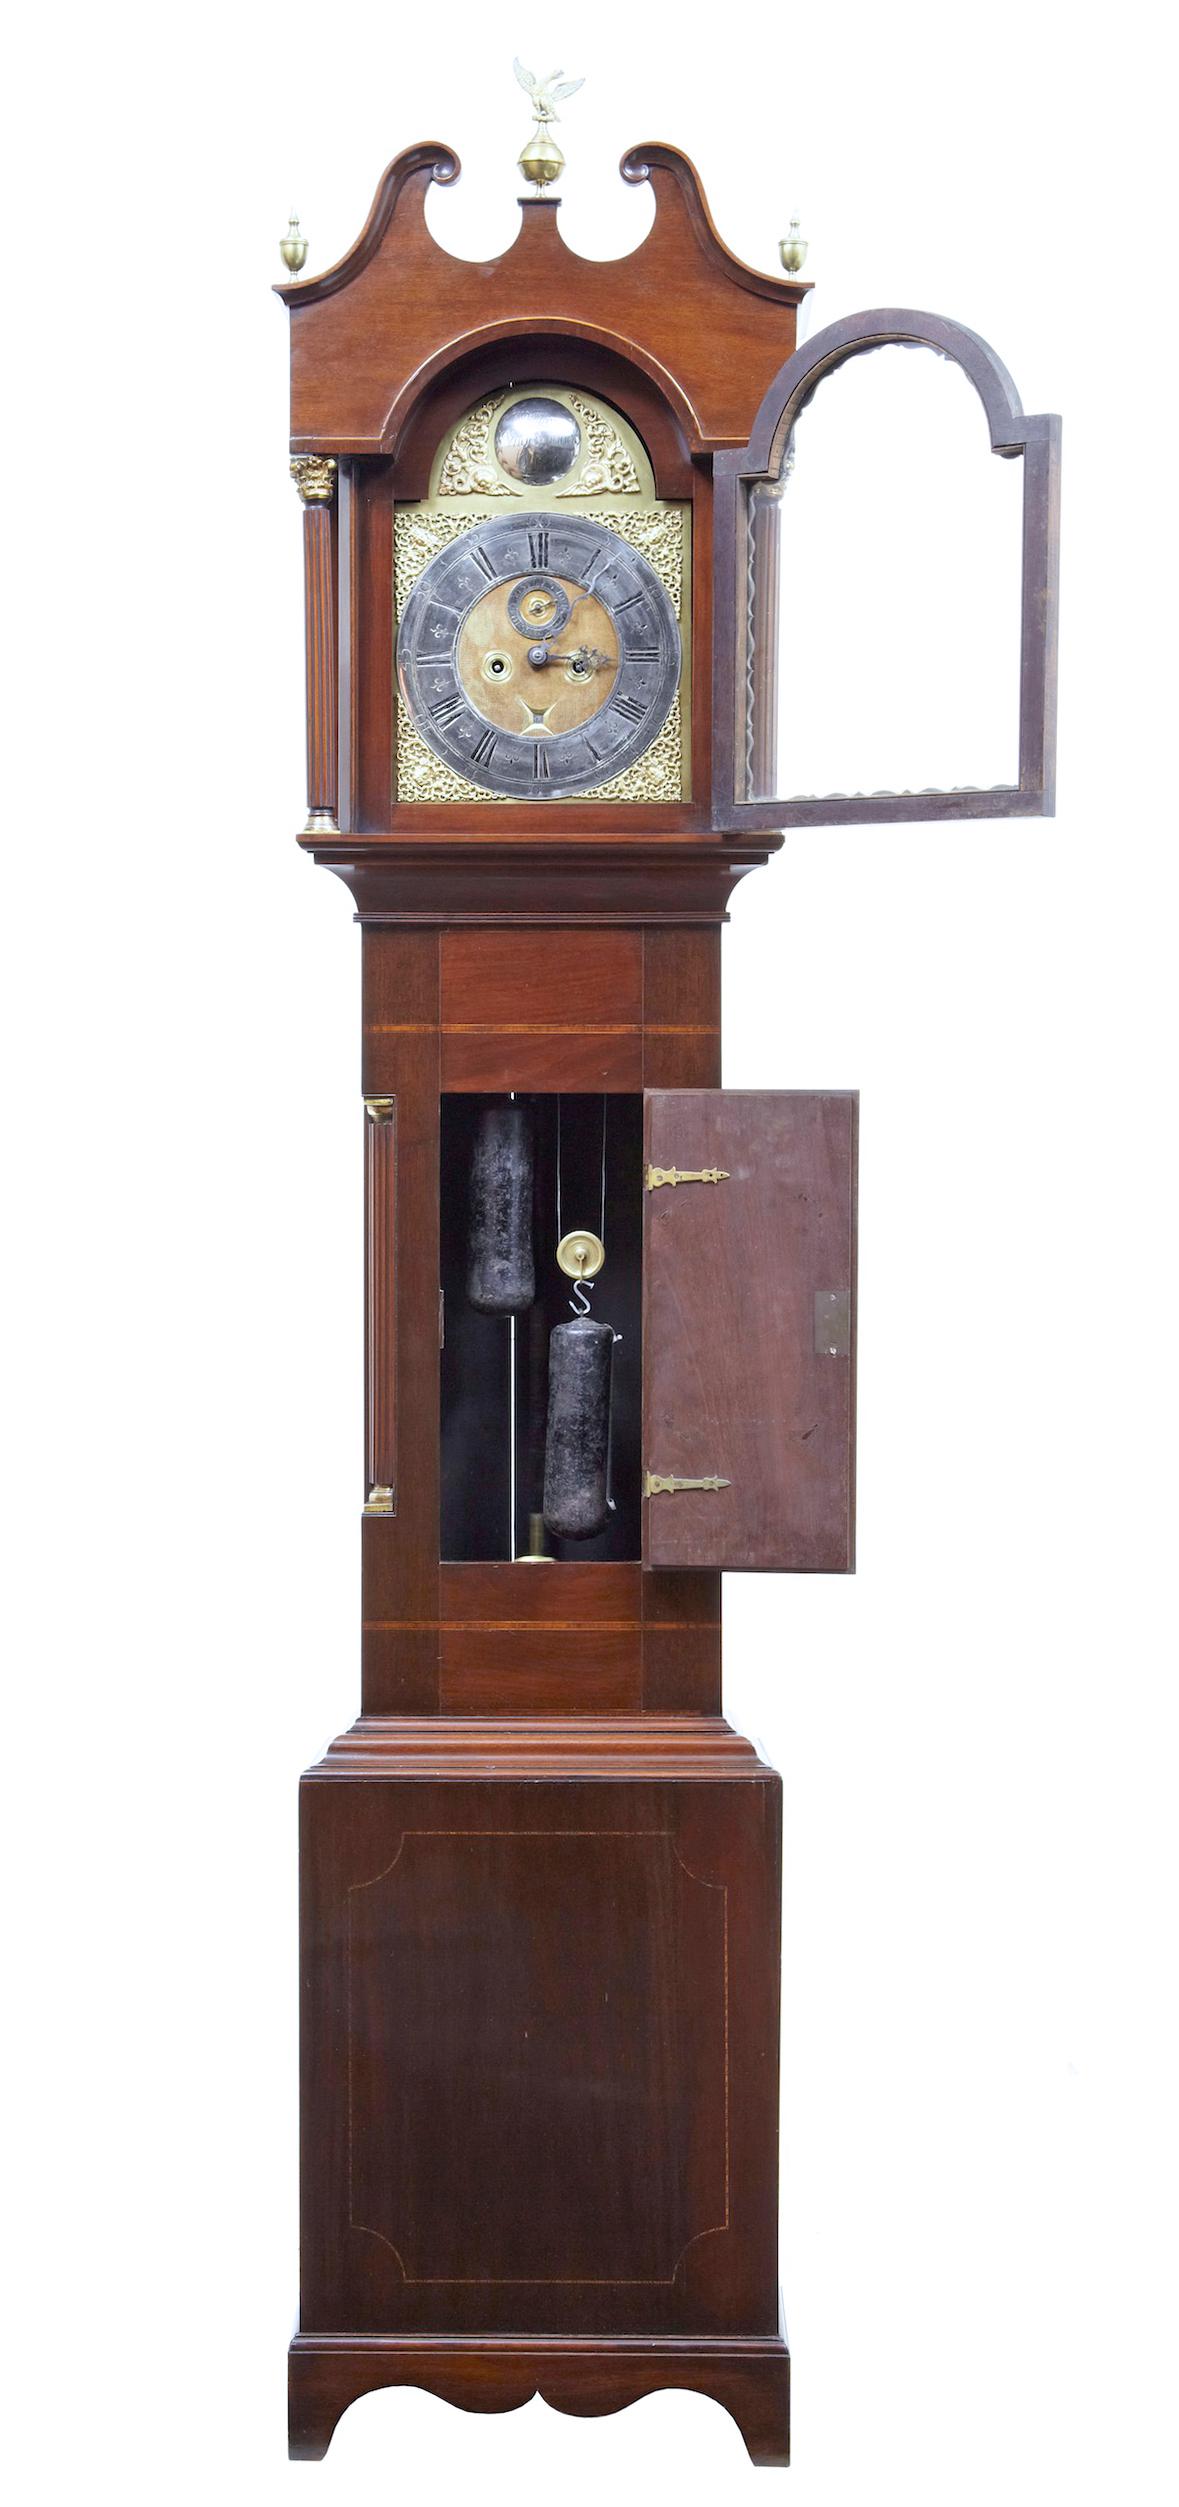 18th century inlaid mahogany long case clock by William Underwood of London, circa 1760.

Excellent quality clock by renowned London maker William Underwood, circa 1760. Second hand dial and date. Original wind on arm. Stringing all round outer